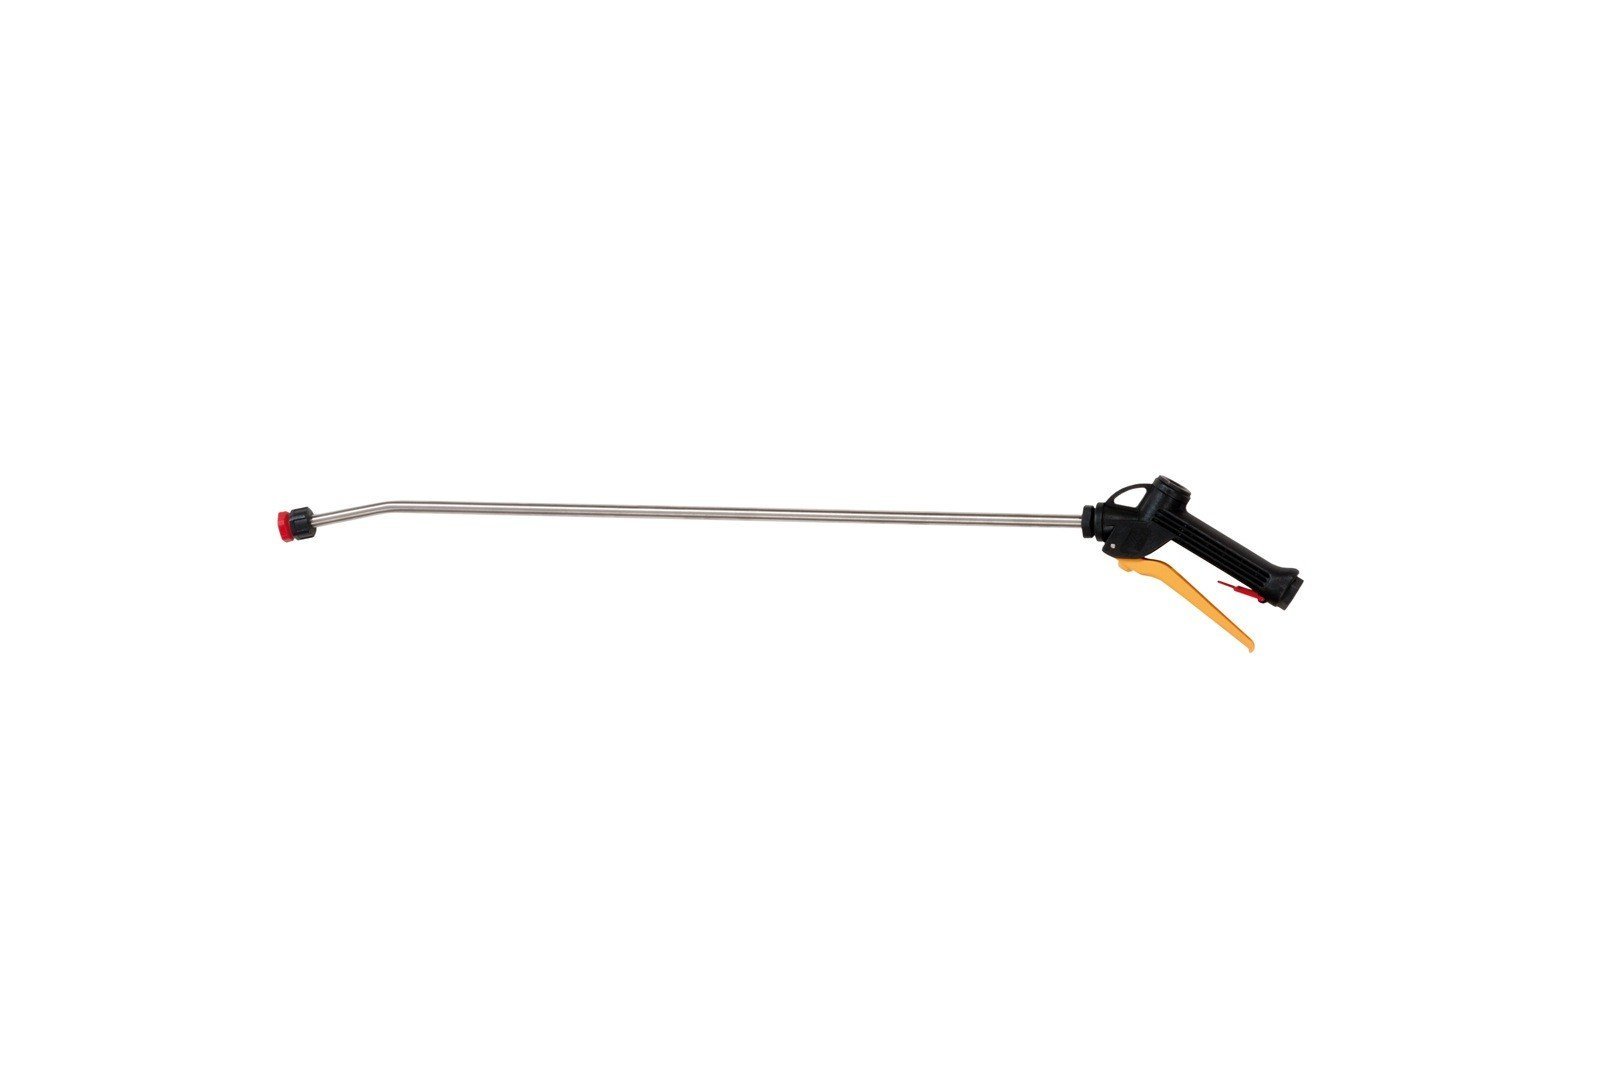 053-1542-000 - Spray gun with 750 mm stainless steel pipe